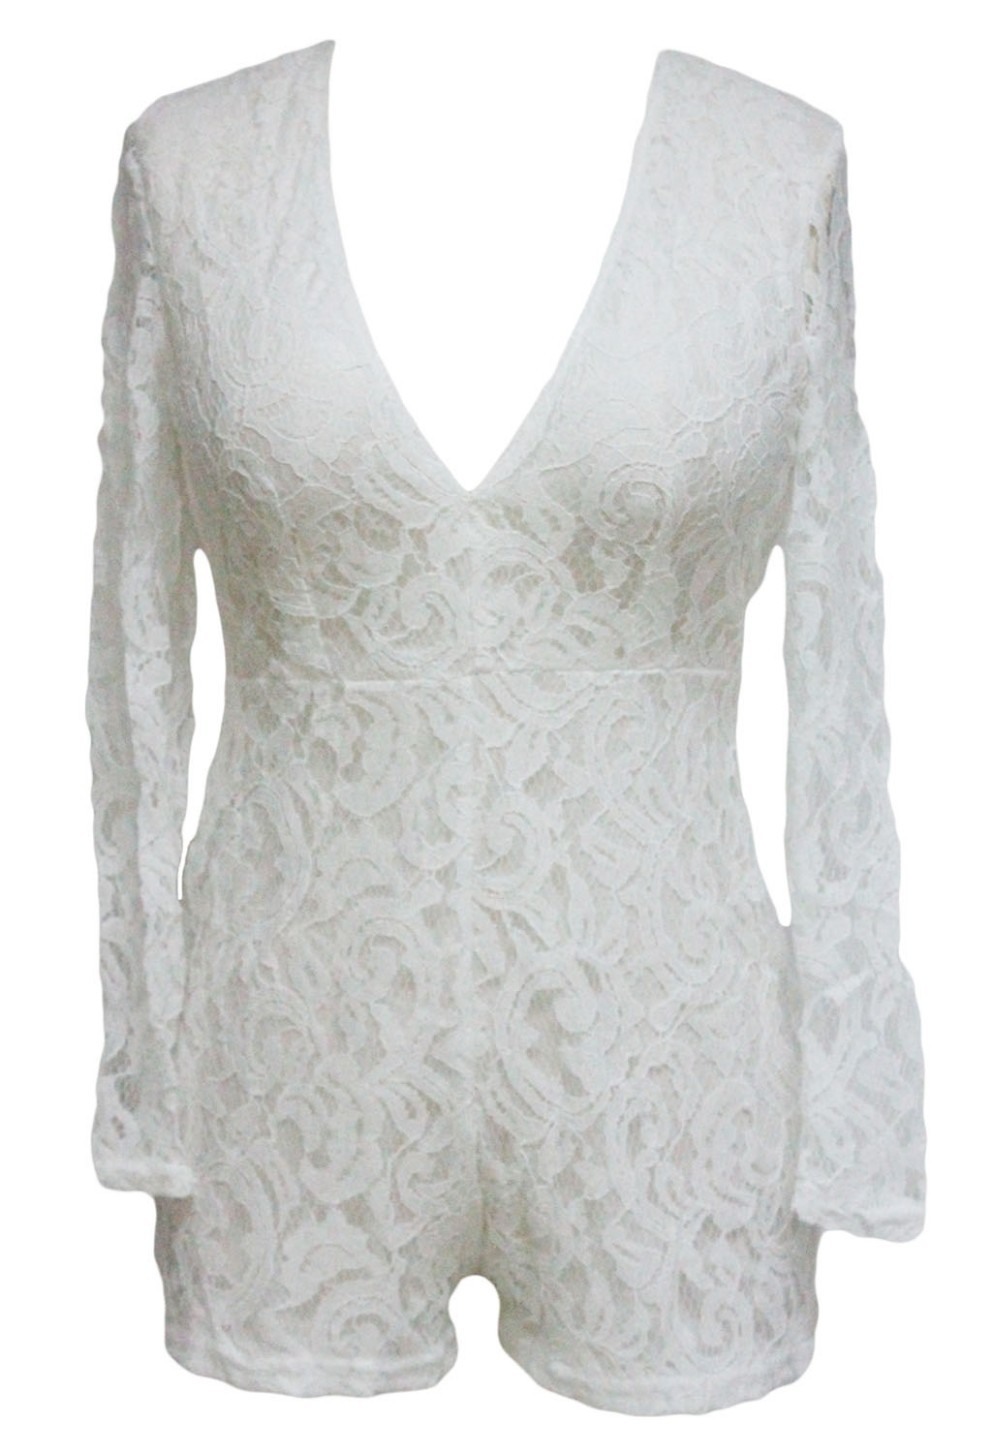 White-Alluring-Deep-V-Neck-Long-Sleeve-Lace-Romper-LC60071-1-2